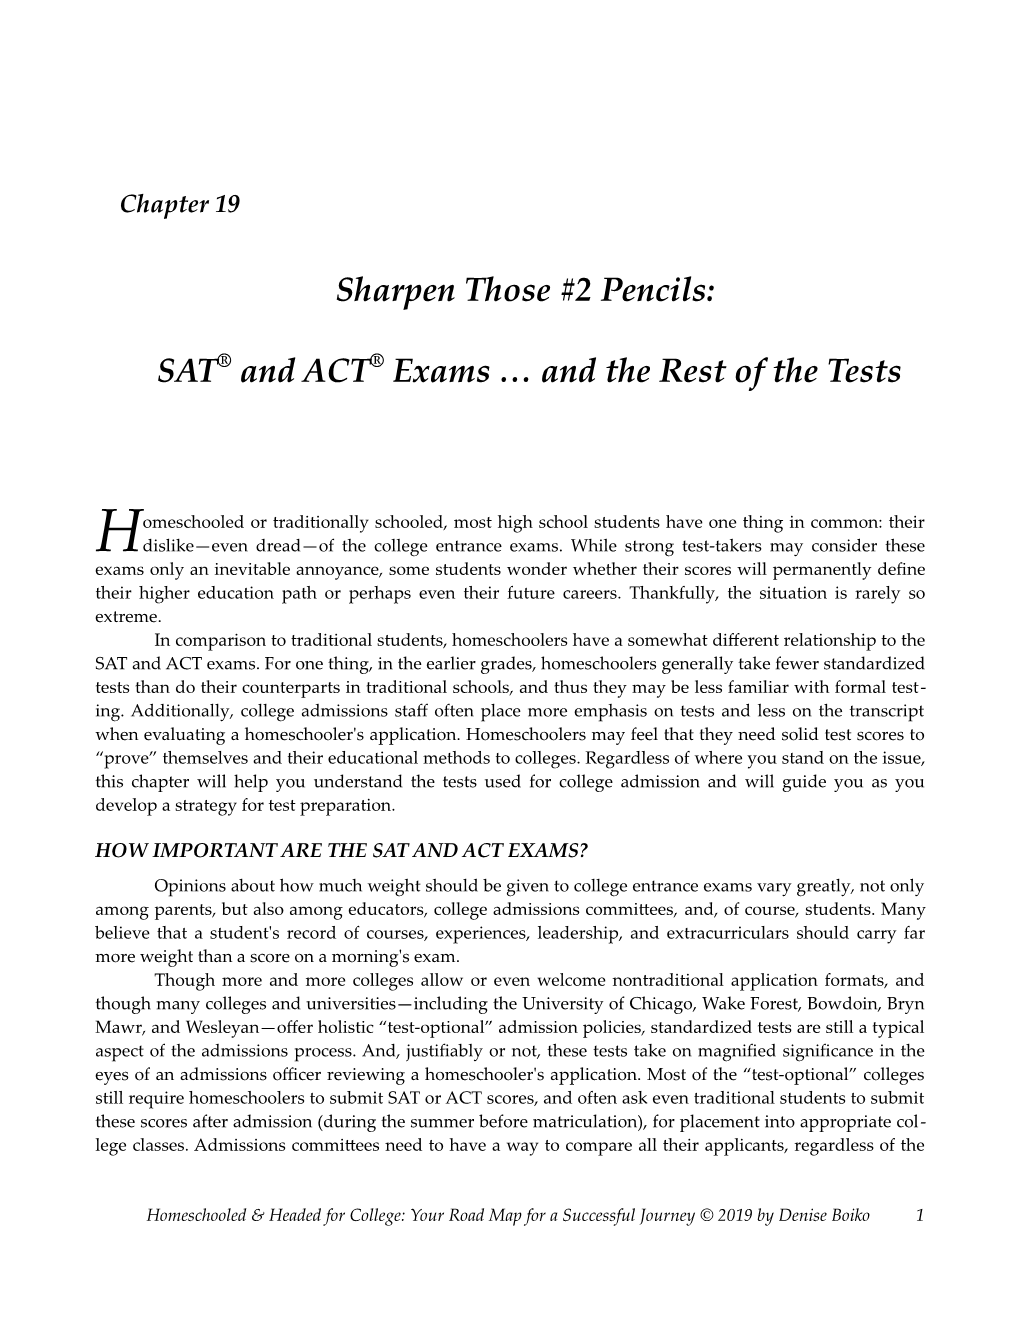 Sharpen Those #2 Pencils: SAT® and ACT® Exams … and the Rest of The